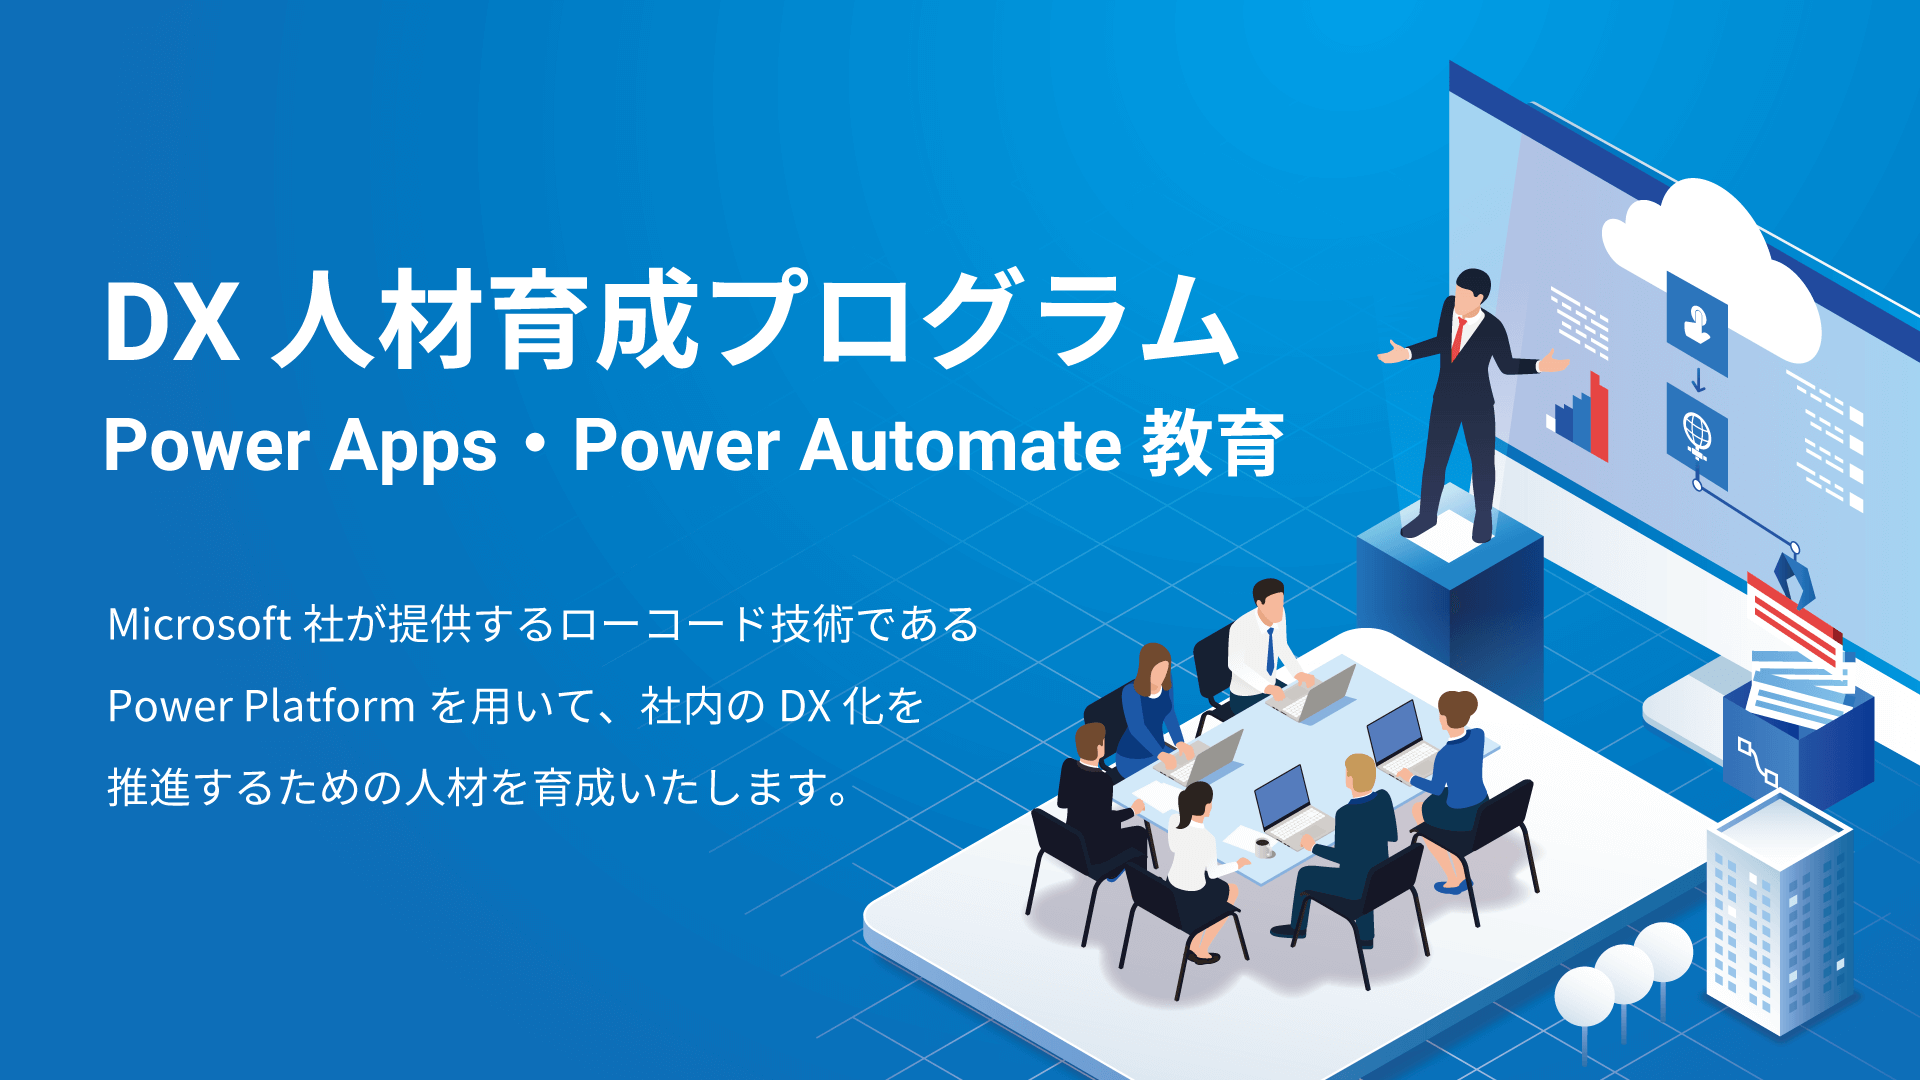 DX人材育成プログラム | Power Apps・Power Automate 教育